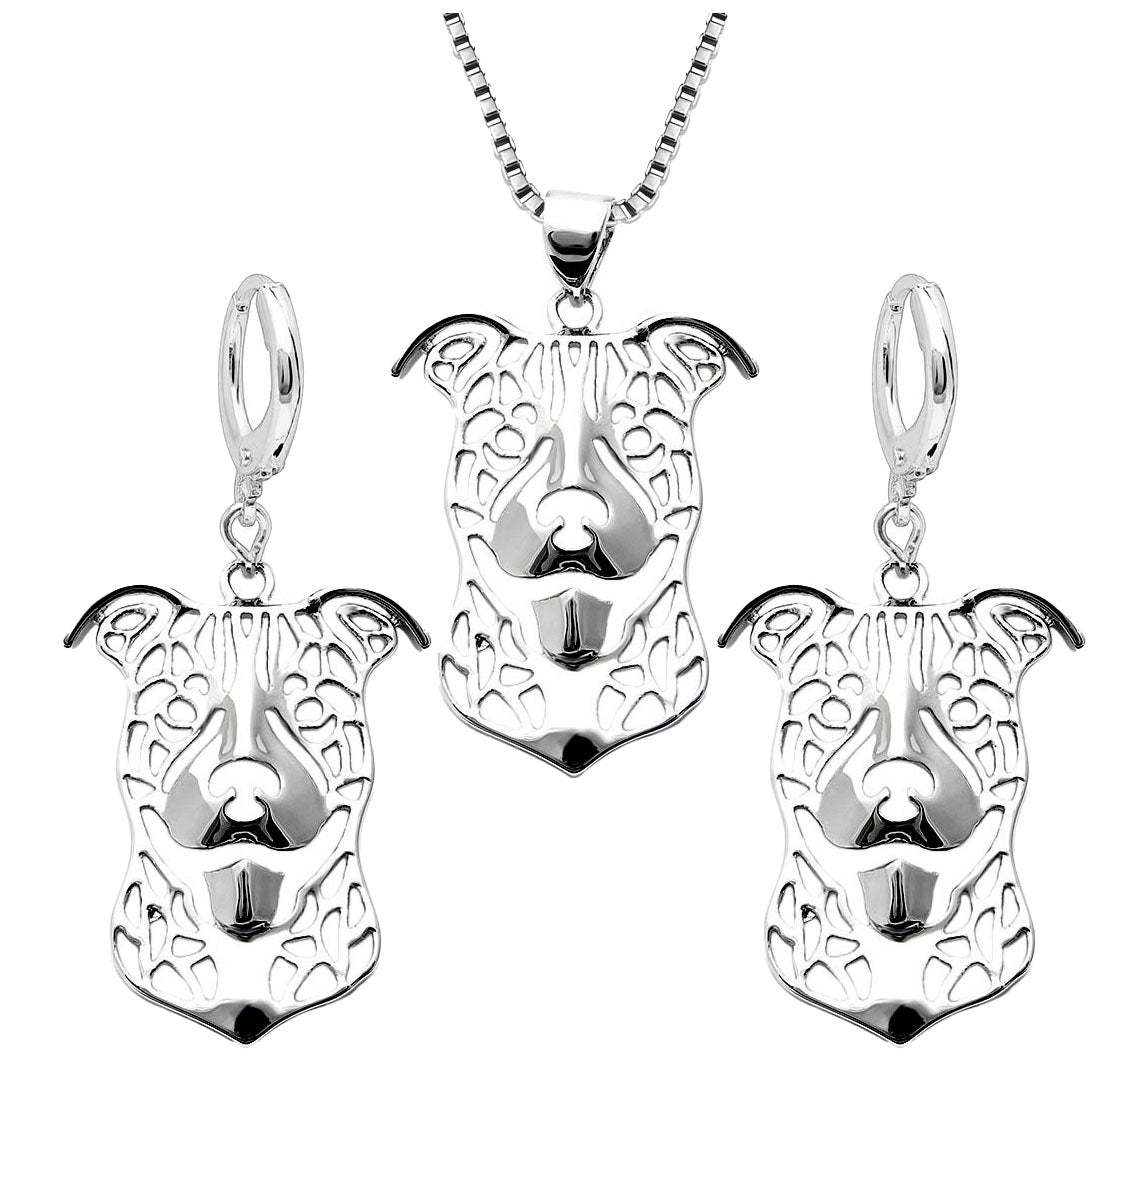 Pit Bull Dog Necklace Earrings Set Sterling Silver Womens Ginger Lyne Collection - Ears Down Dog Set